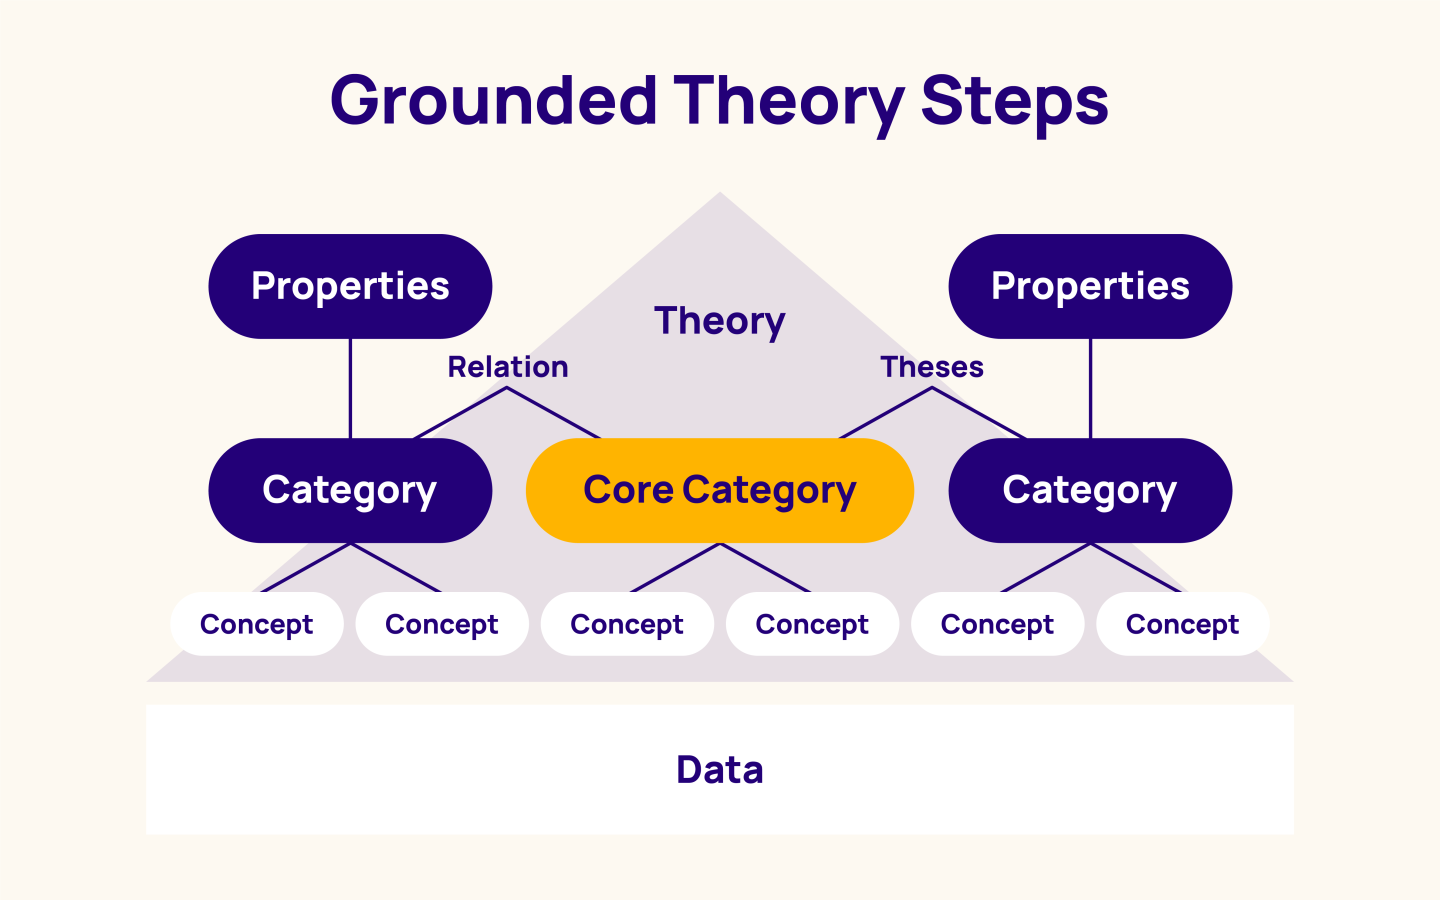 grounded theory qualitative research scholarly articles